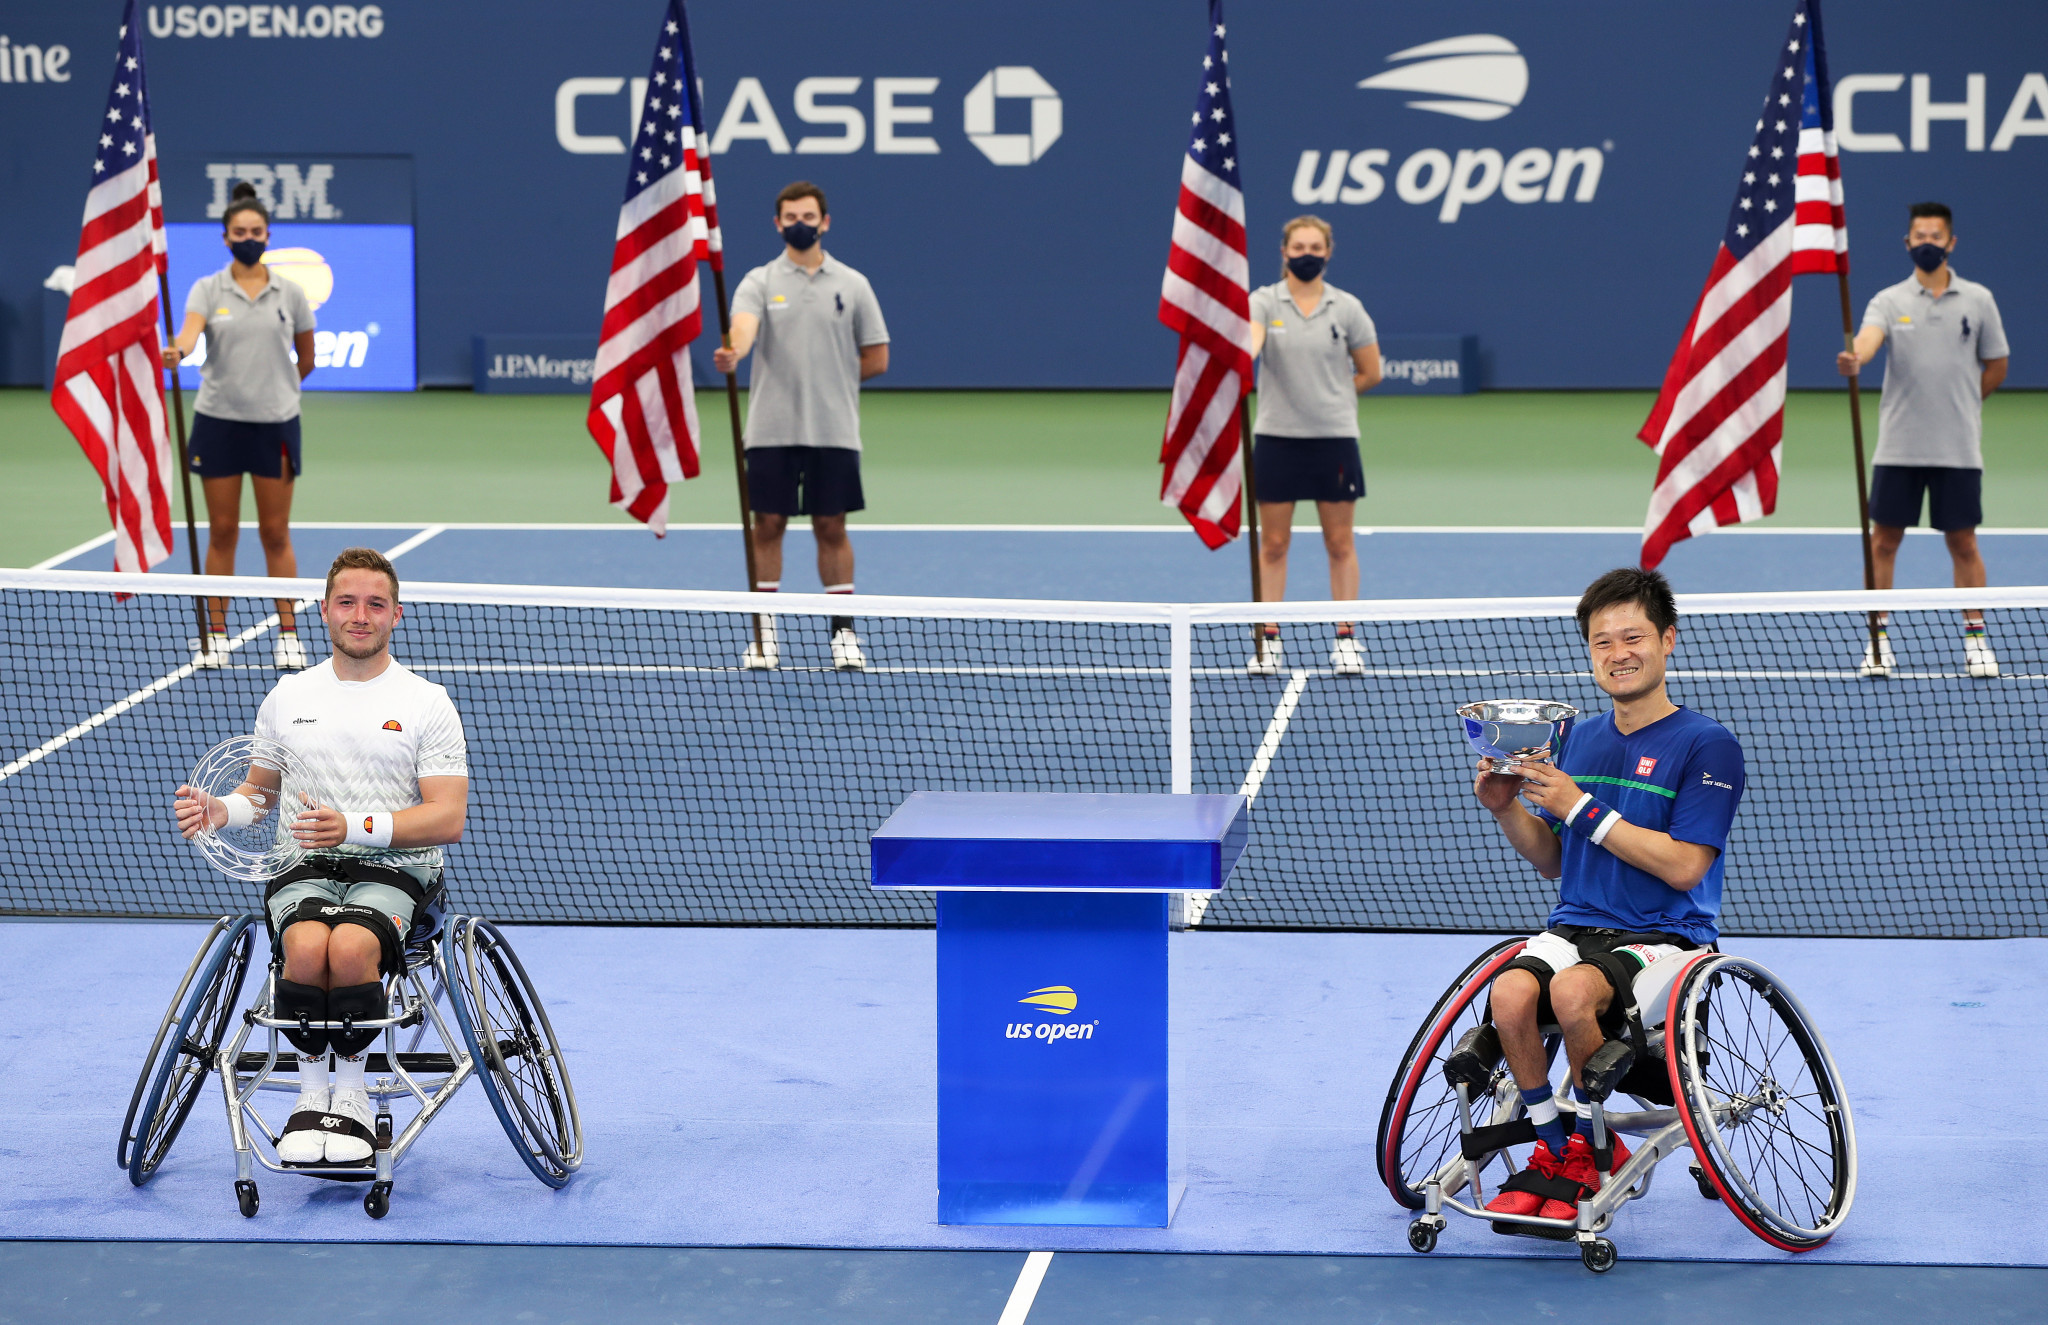 There was a wheelchair contest at the US Open in September ©Getty Images